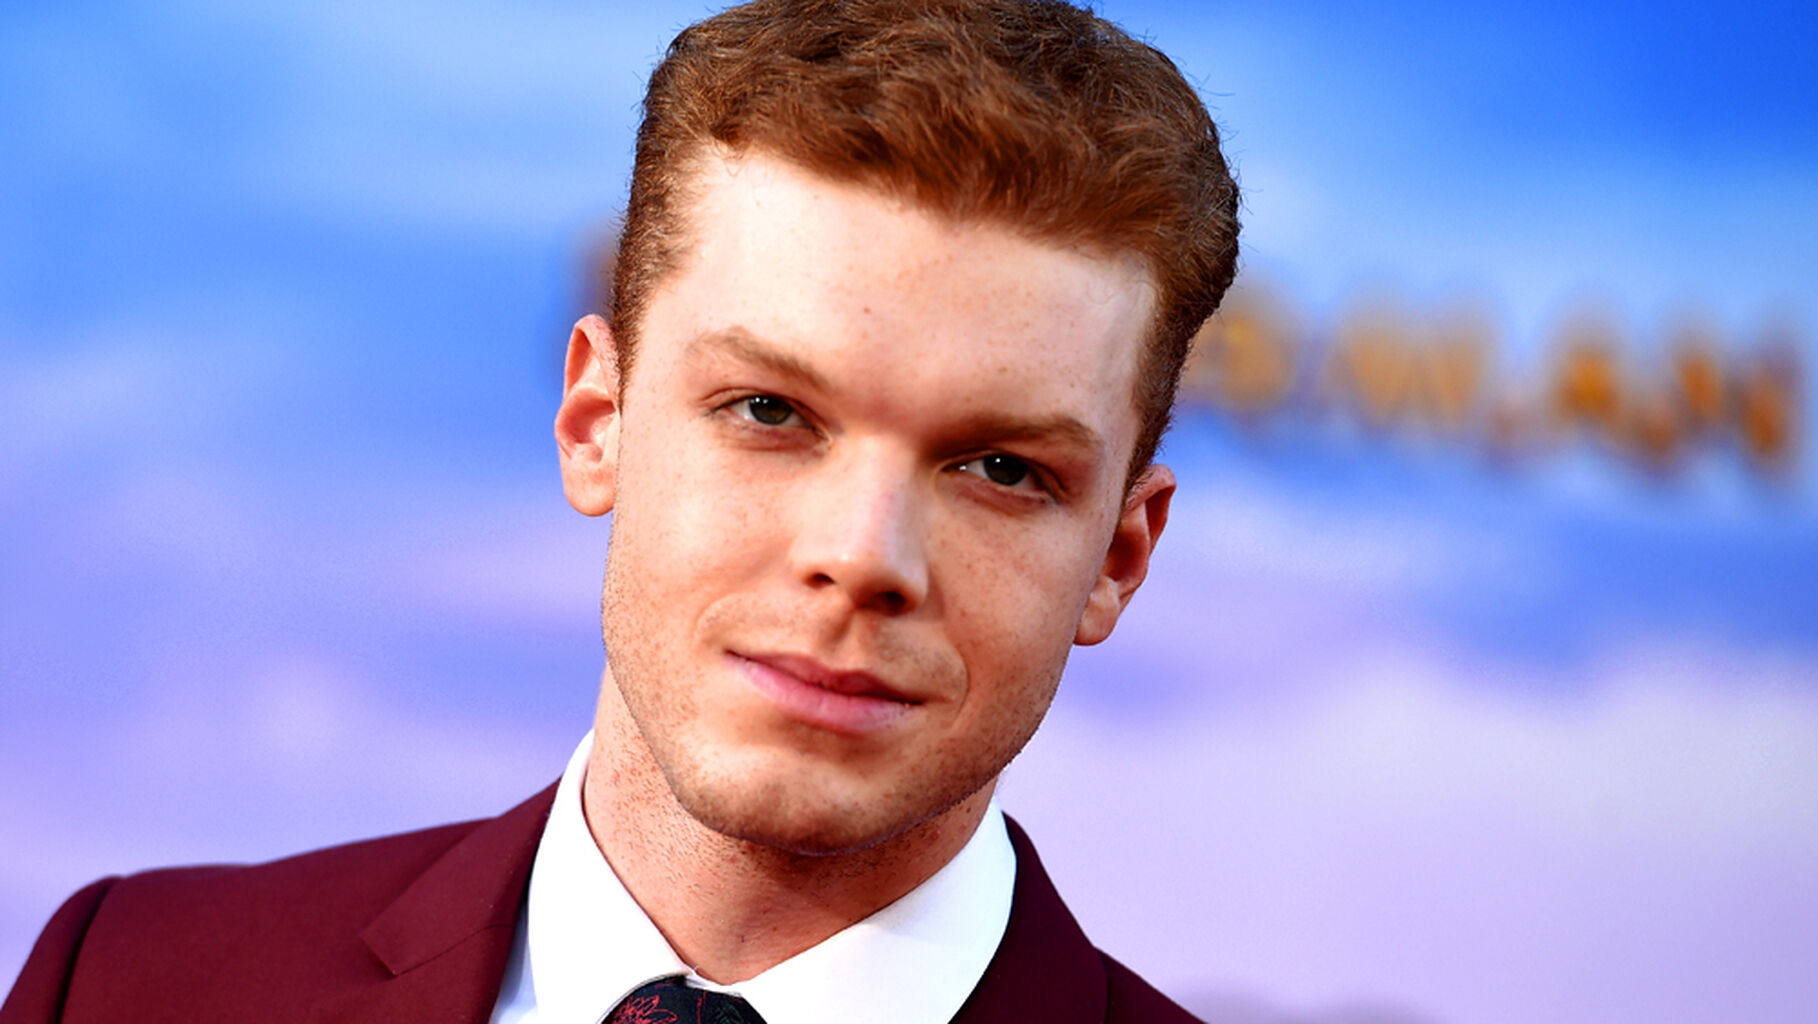 Happy Birthday To The Amazing and Talented Cameron Monaghan Have a Great Day King 